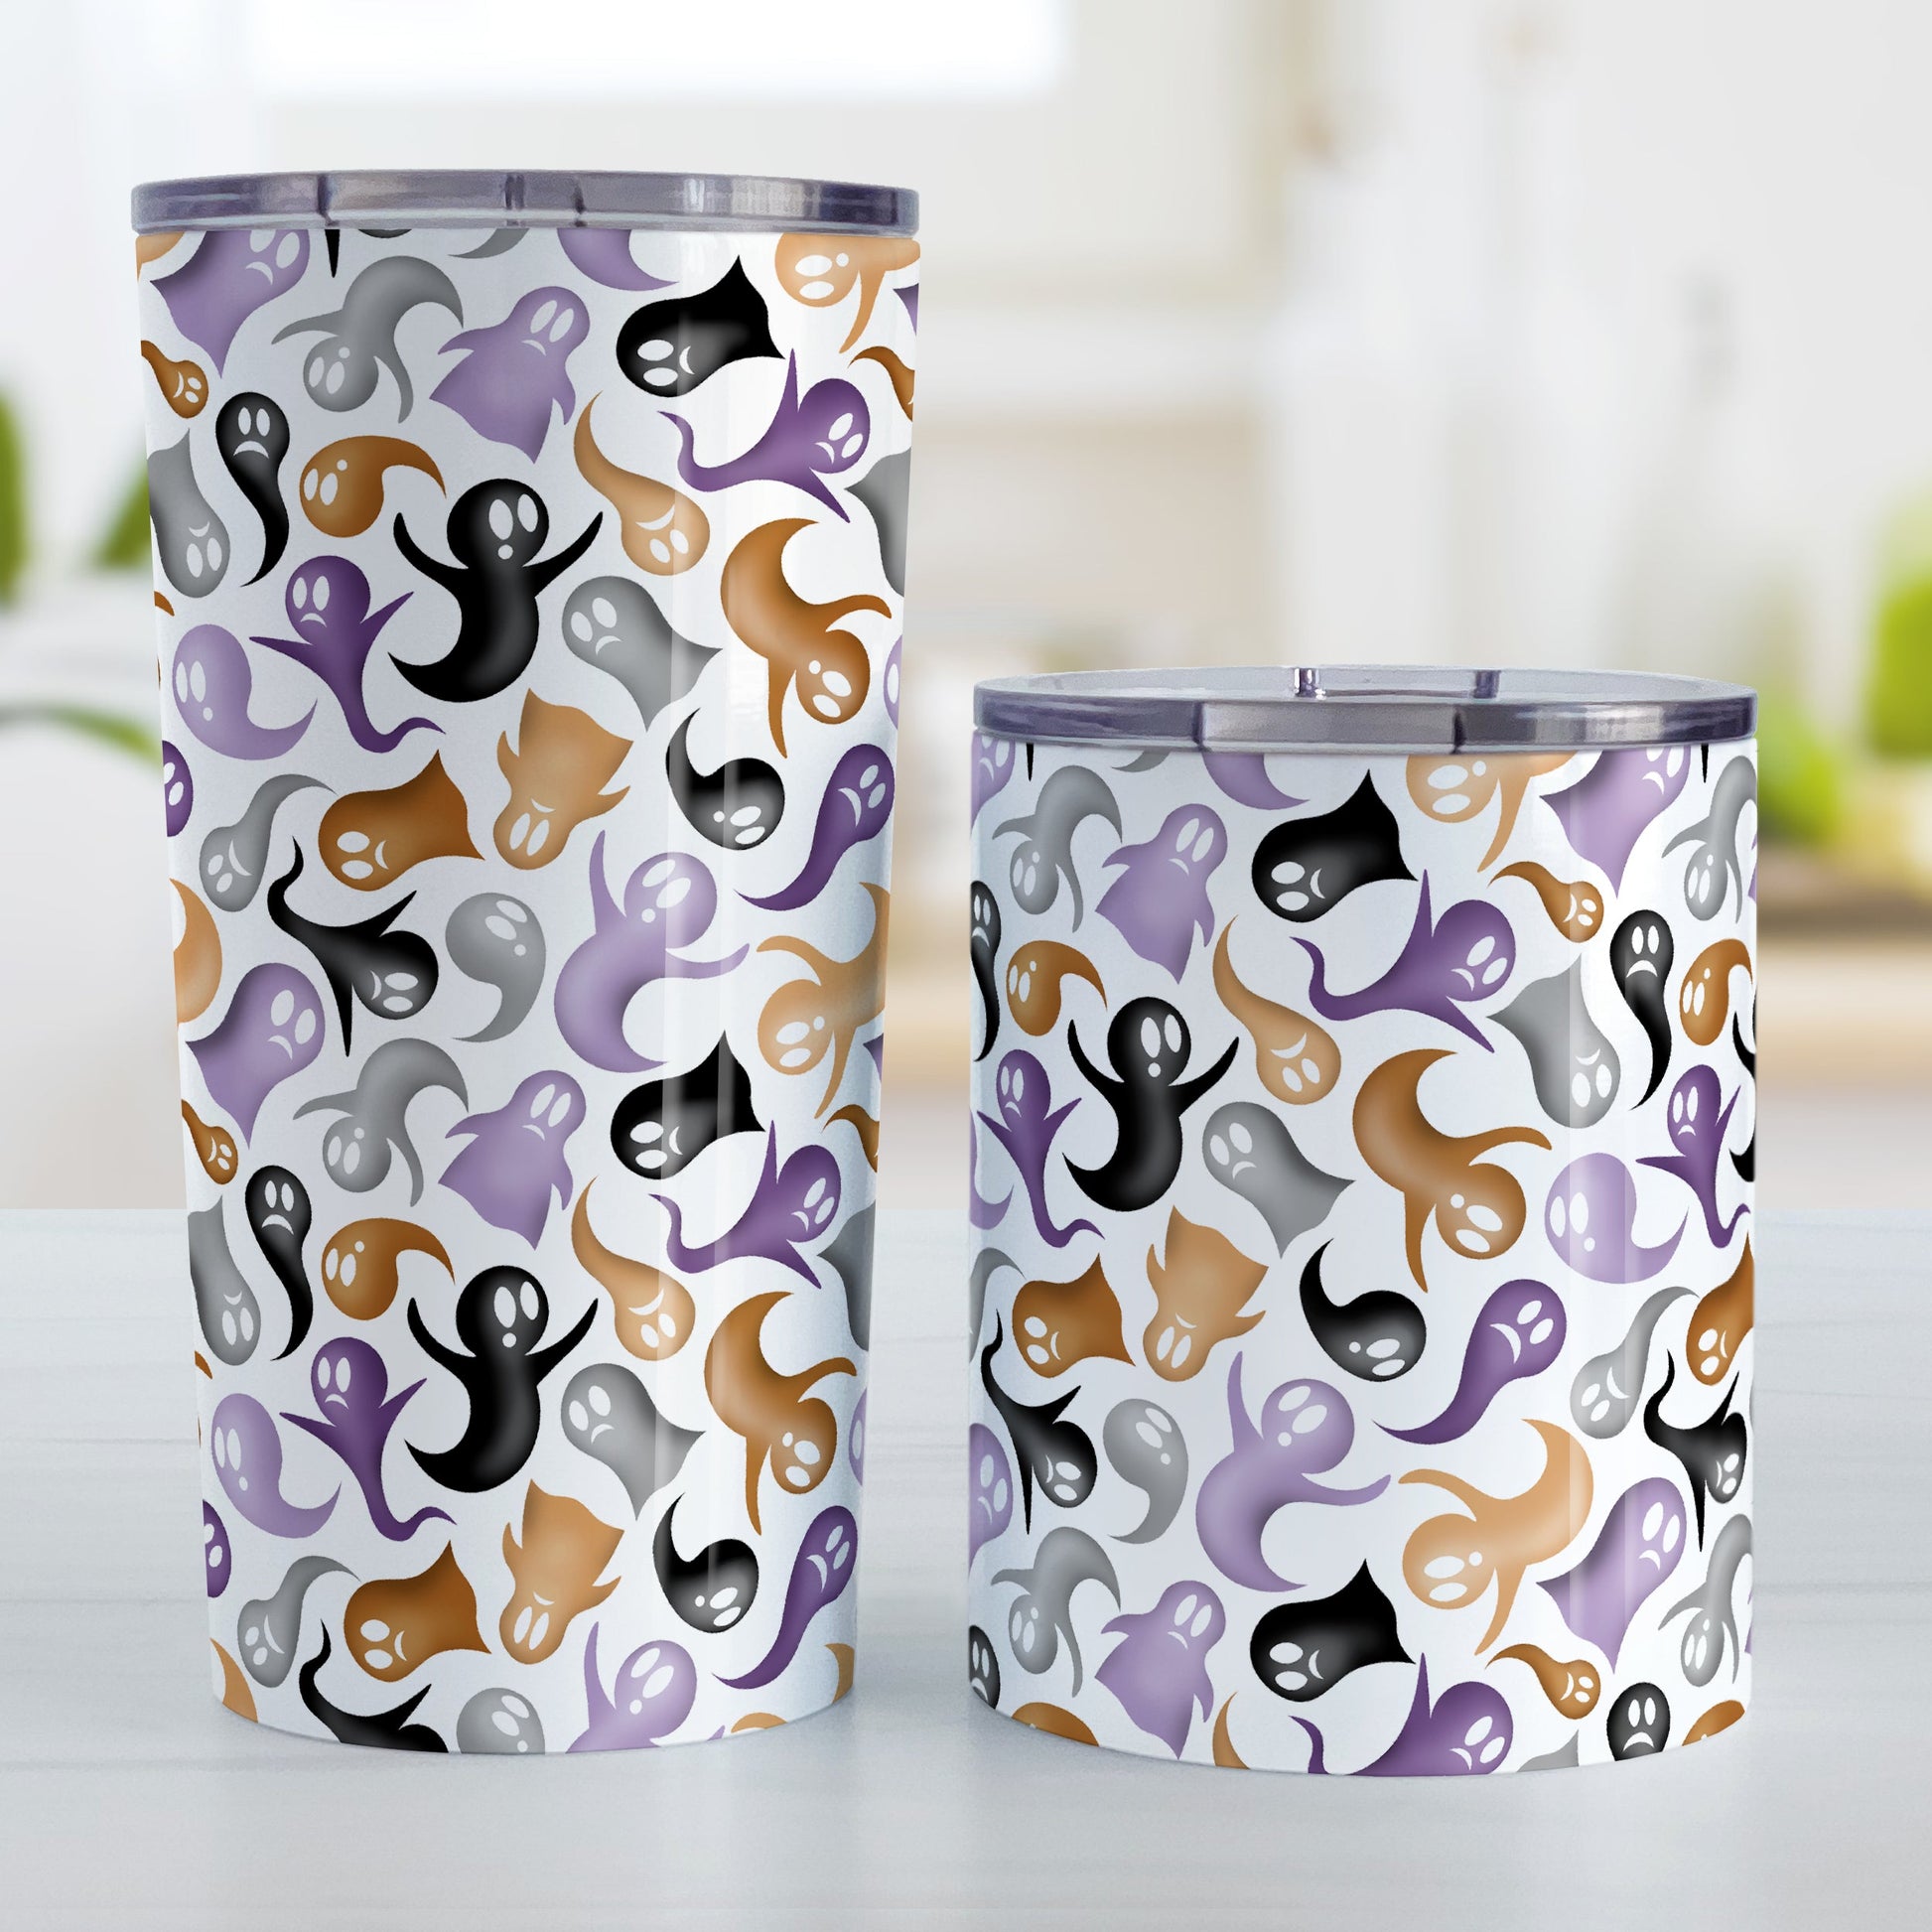 Ghosts and Spirits Halloween Tumbler Cup (20oz and 10oz) at Amy's Coffee Mugs. Stainless steel insulated tumbler cups designed with a whimsical pattern of purple, orange, black and gray ghosts and spirits that wraps around the cups. Photo shows both sized cups next to each other.